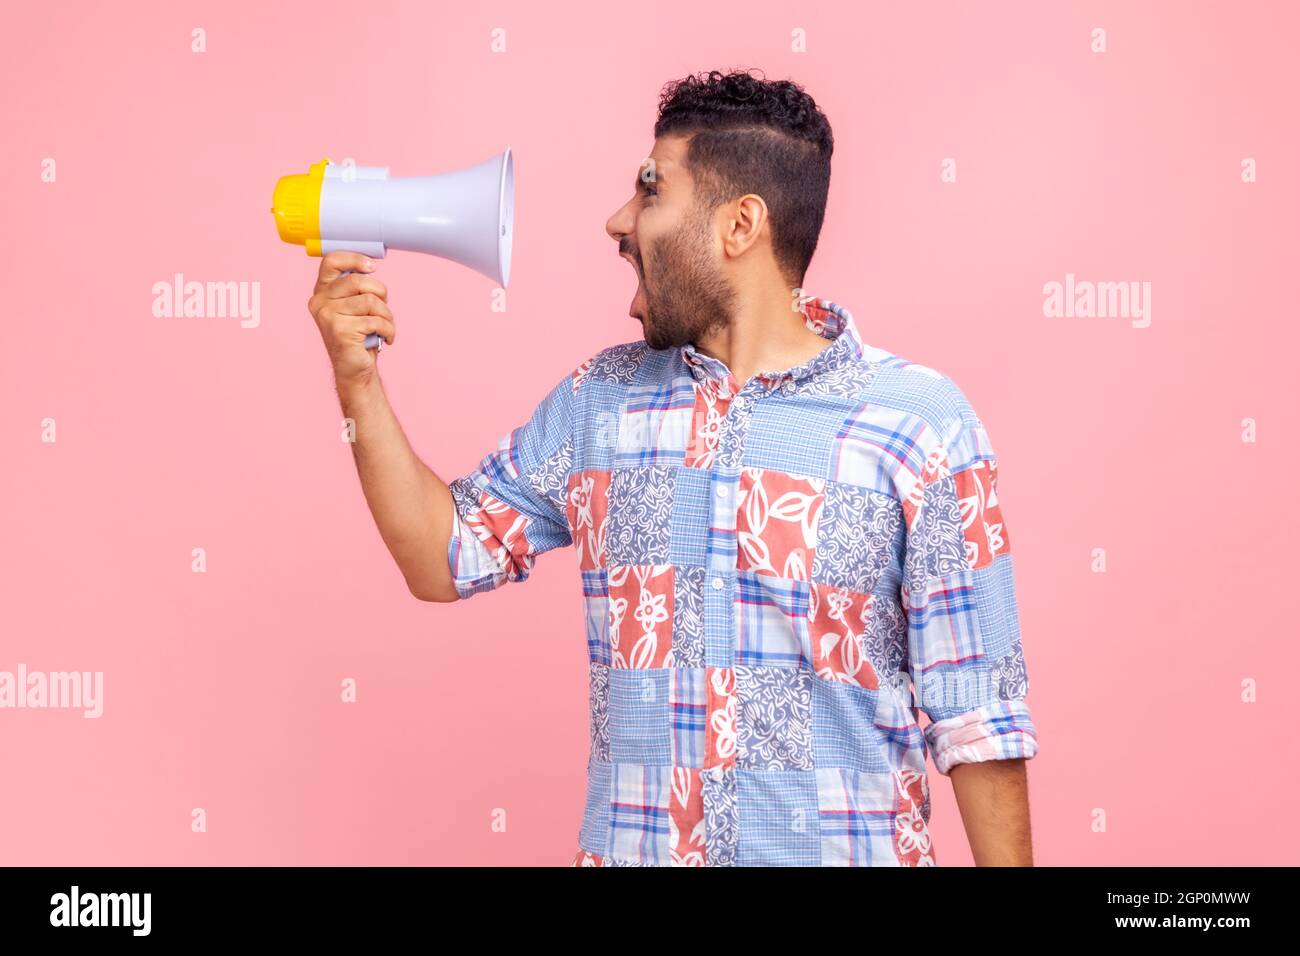 Profile of young adult excited crazy bearded man wearing blue casual style shirt screaming holding loudspeaker megaphone, looking aside at loud speaker. Indoor studio shot isolated on pink background. Stock Photo